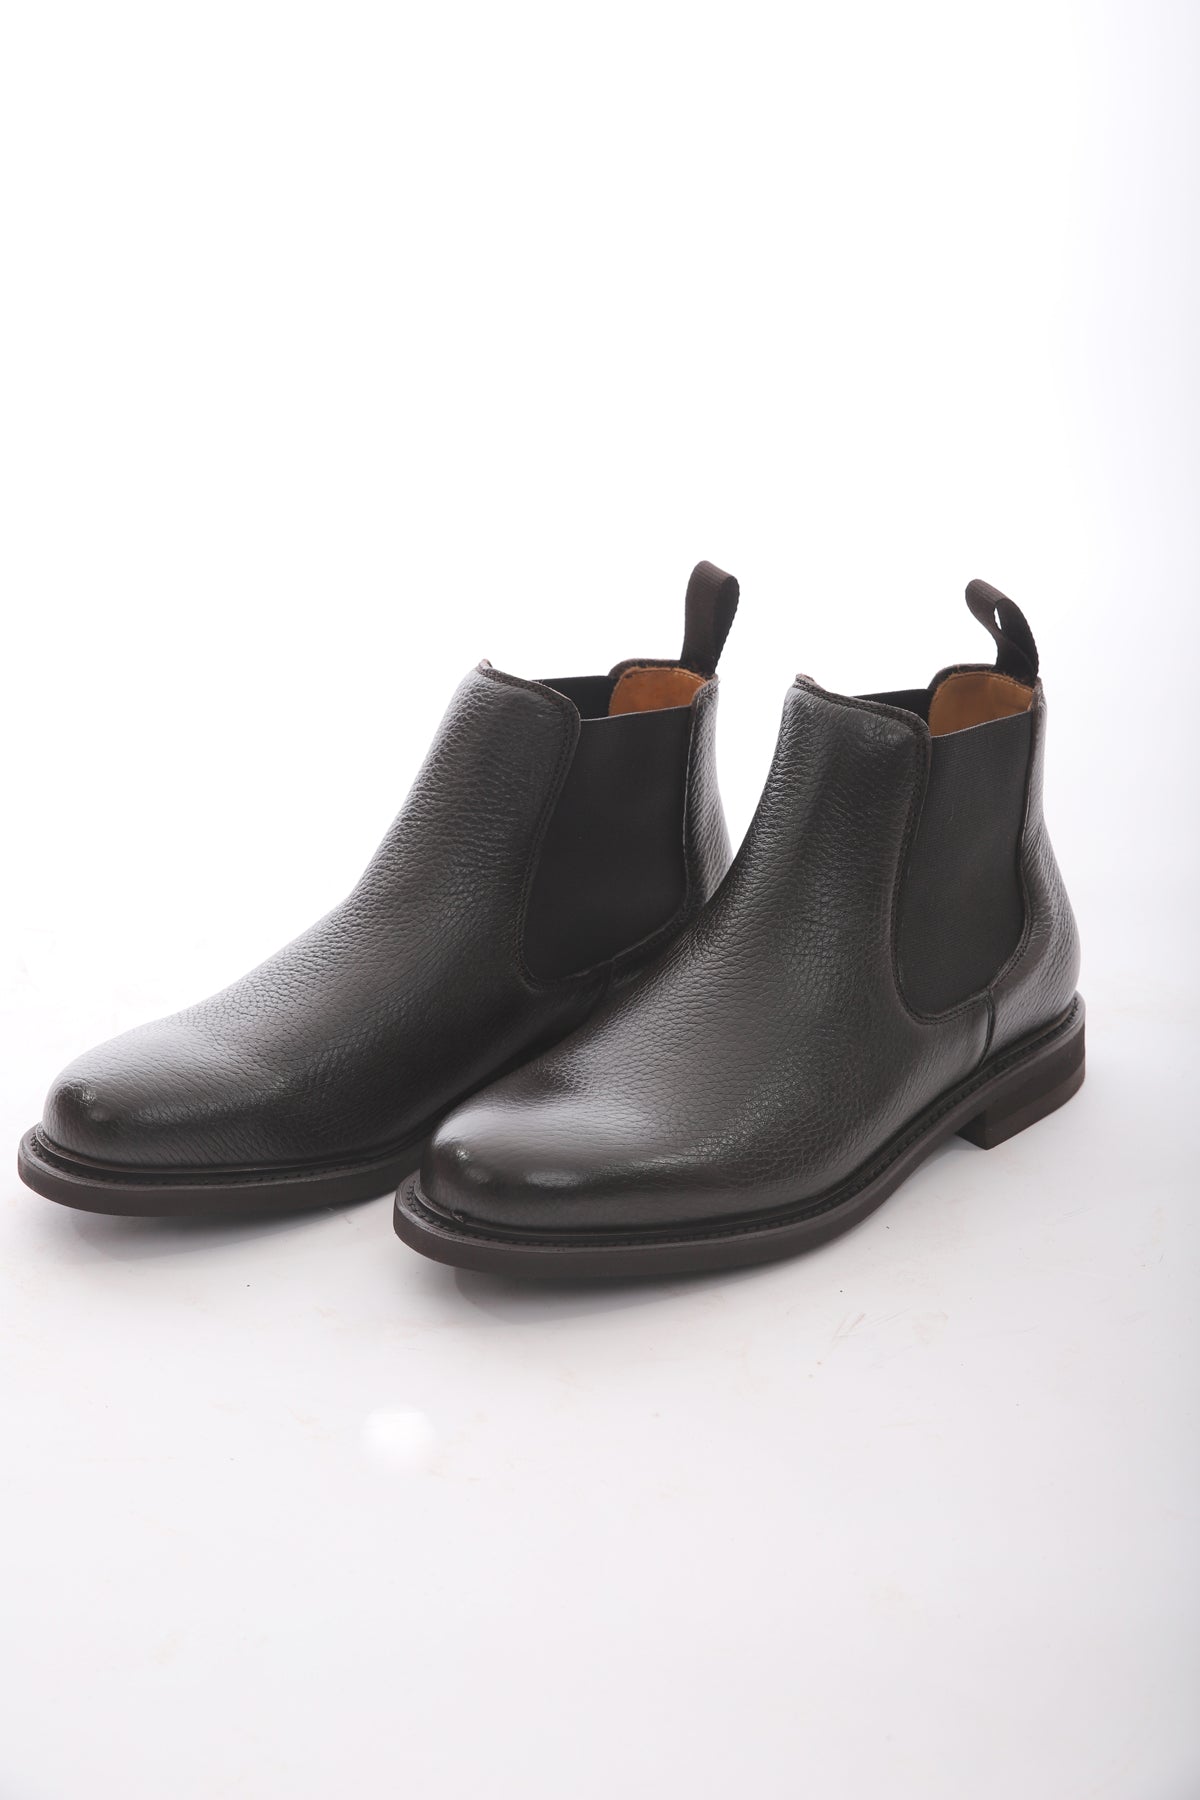 Men's ankle boots in hammered leather